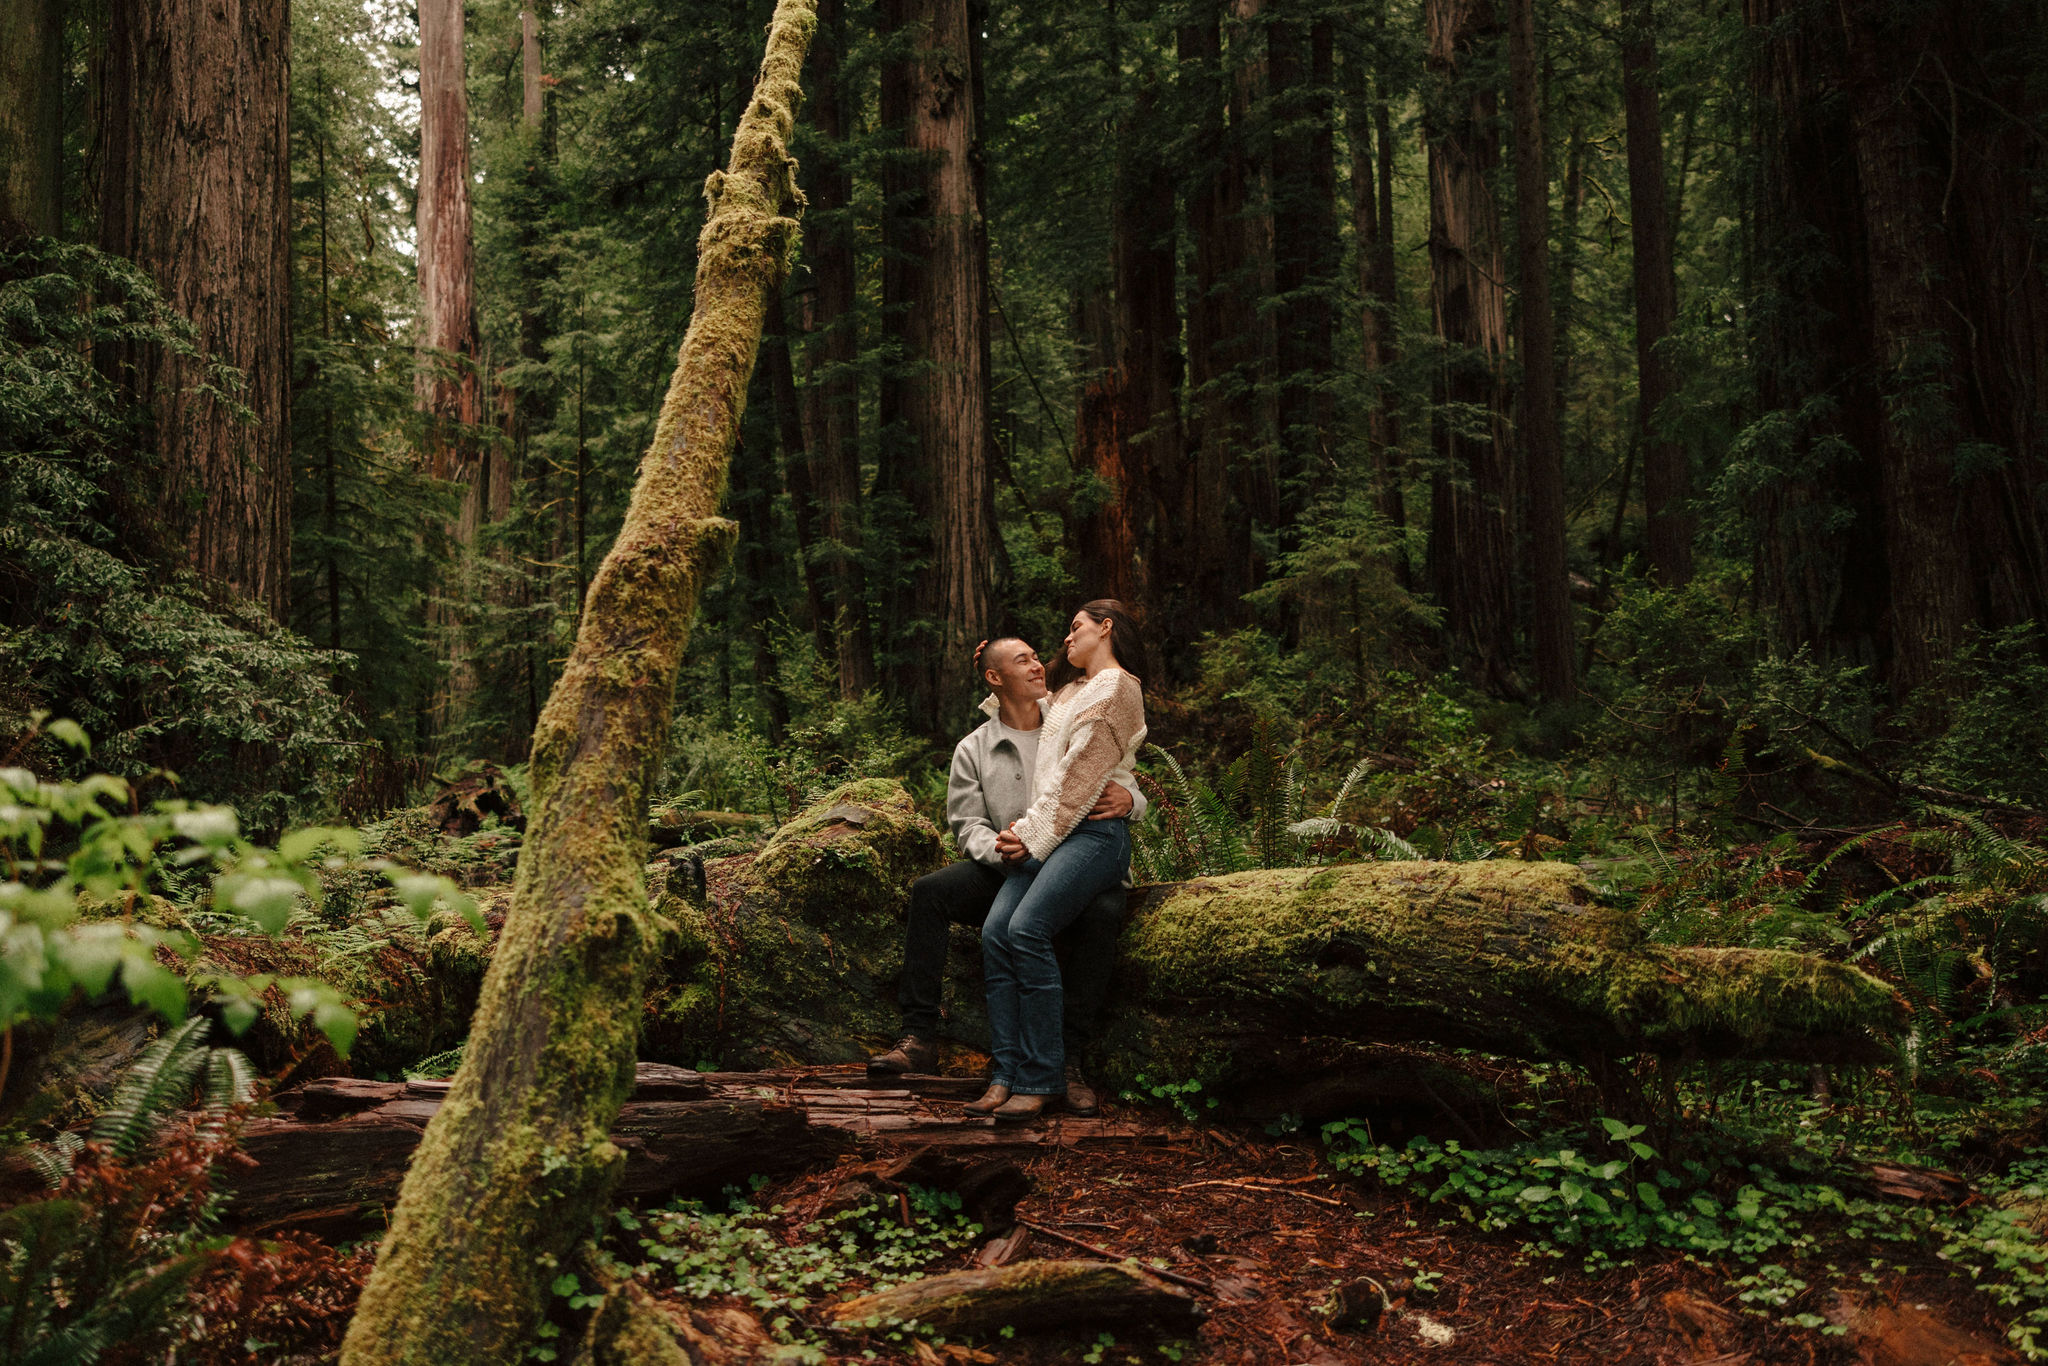 stunning couple pose amongst the gigantic Redwood trees during their documentary style Redwood forest engagement photoshoot